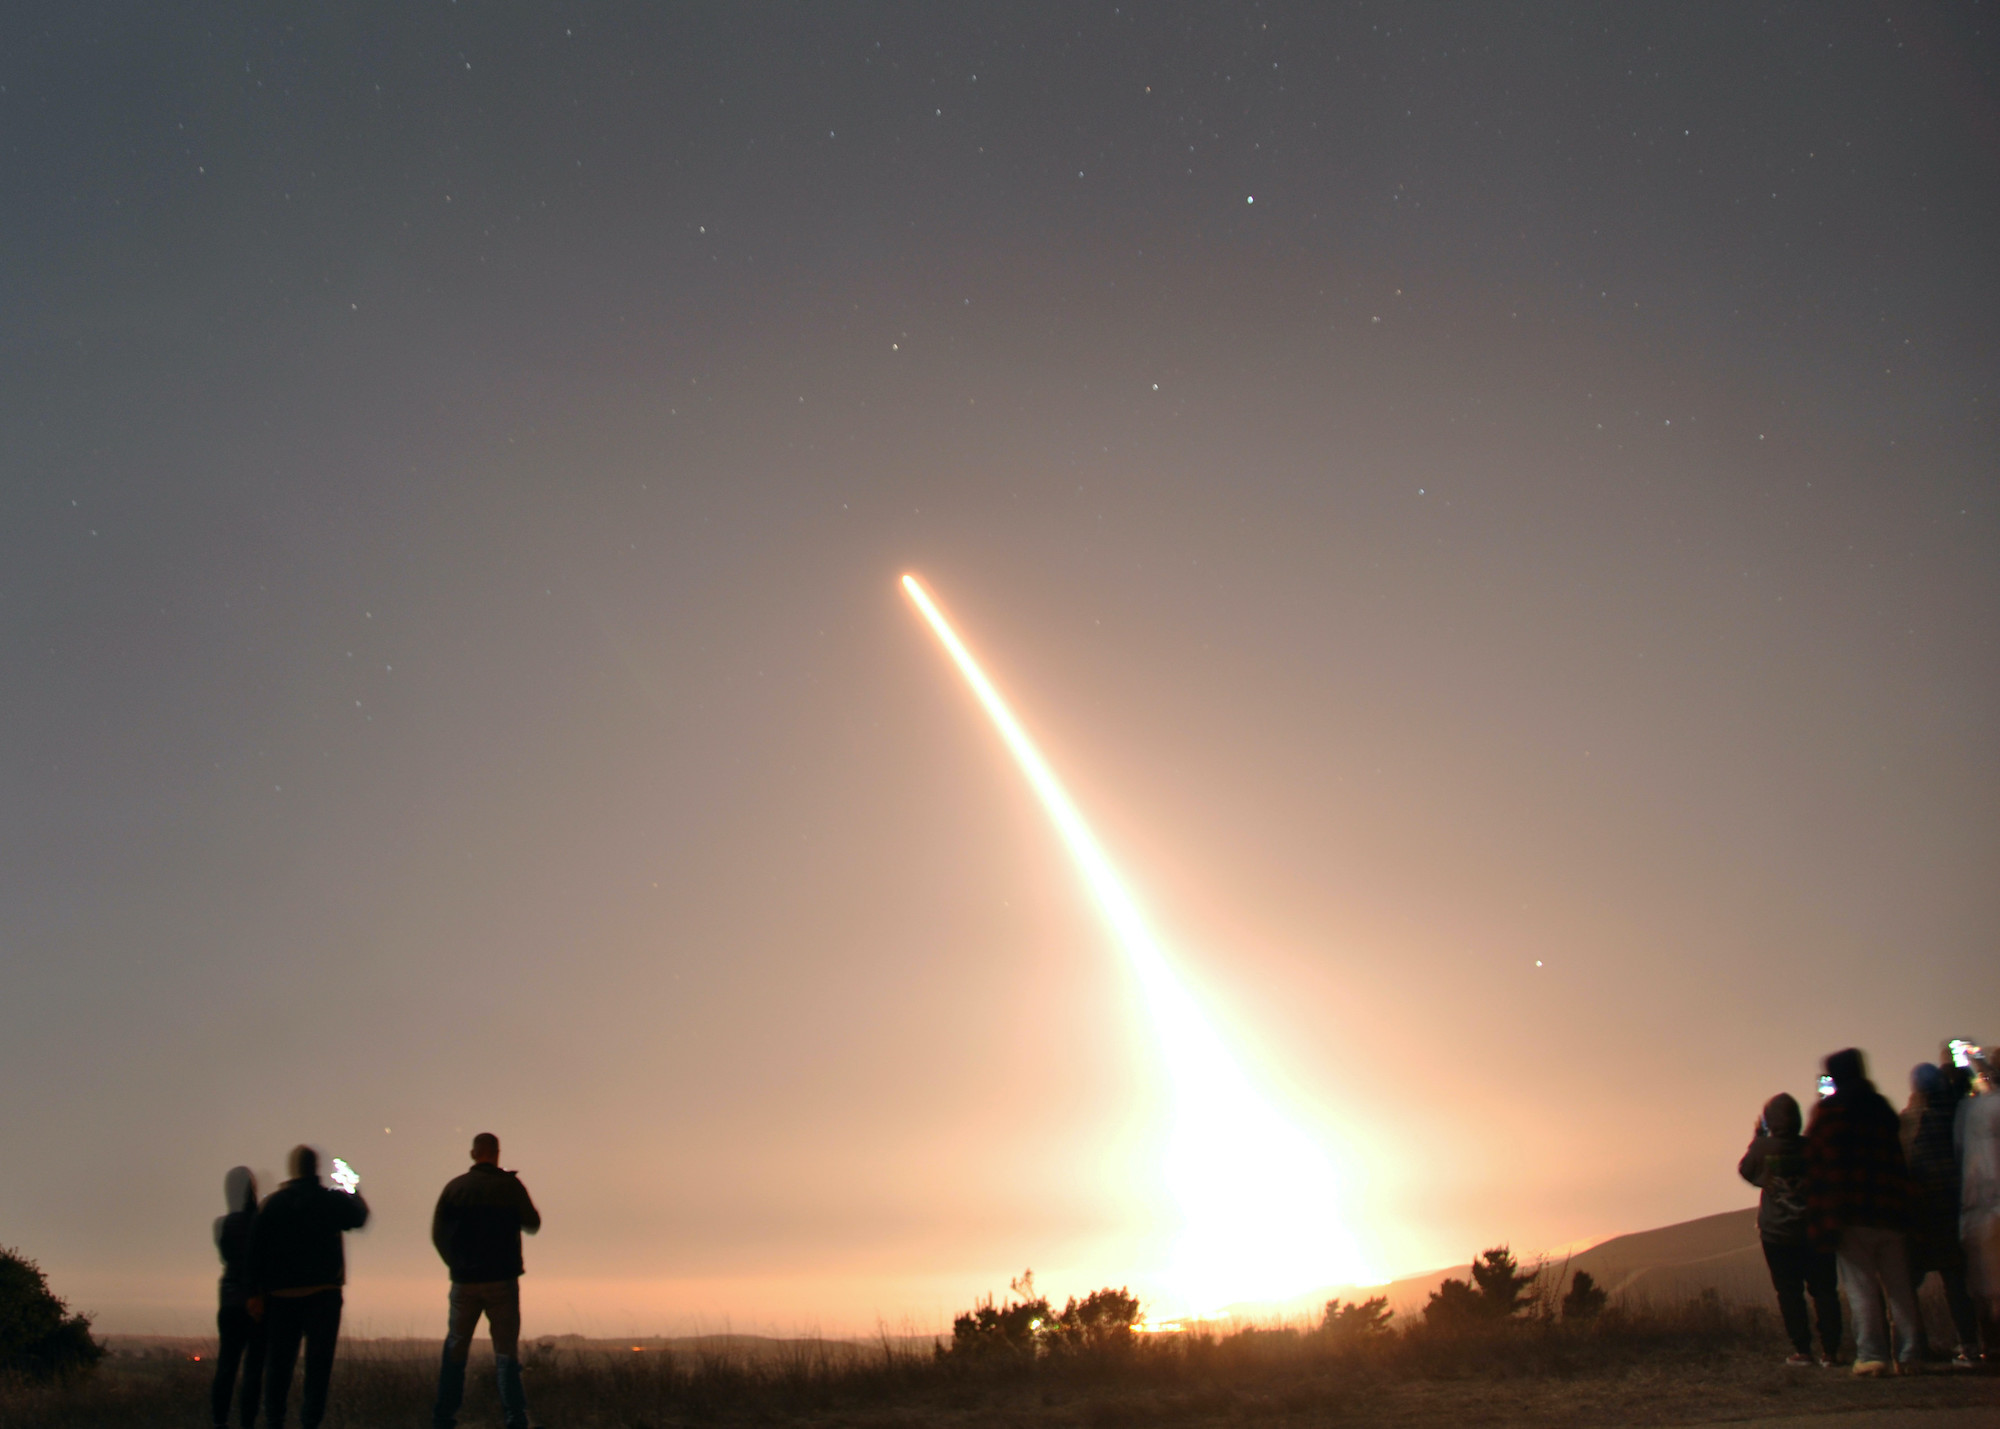 An Air Force Global Strike Command unarmed Minuteman III intercontinental ballistic missile launches during an operational test at 12:27 a.m. Pacific Time, Thursday, October 29, 2020, at Vandenberg Air Force Base, California